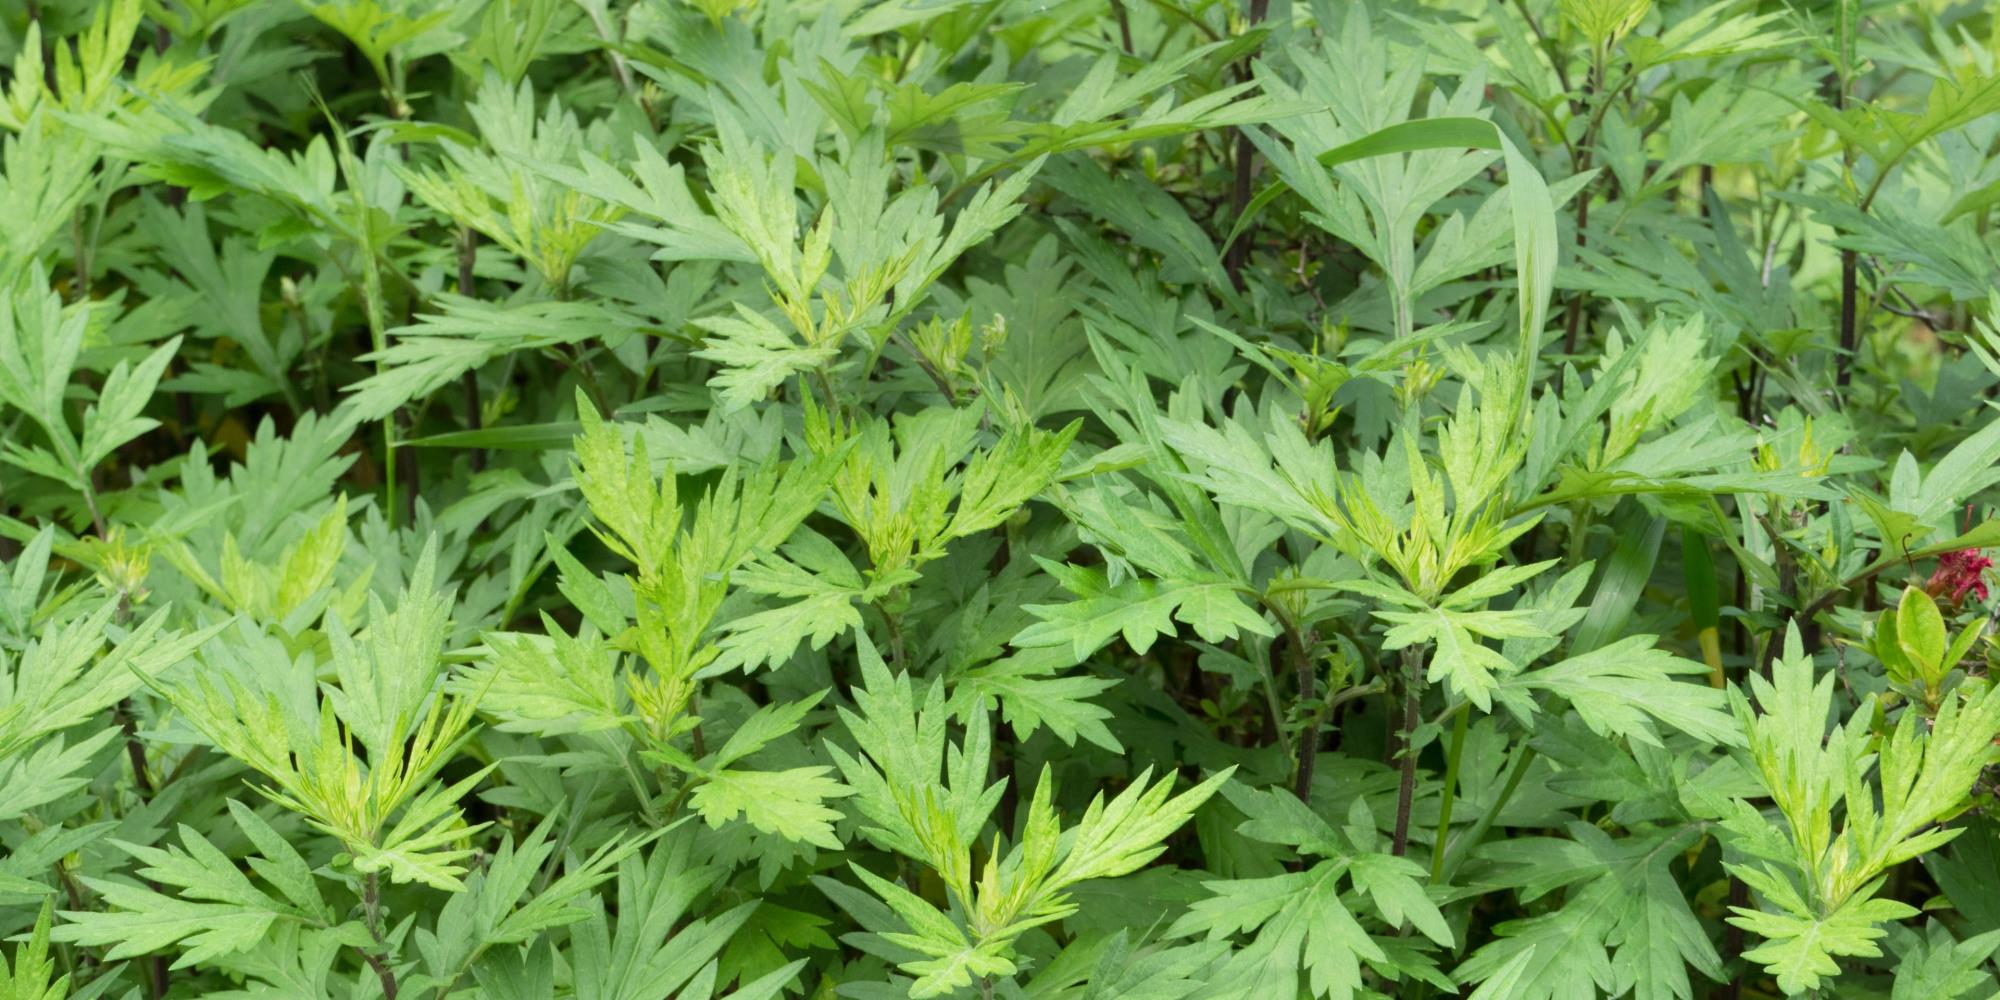 3 Things to do with Mugwort